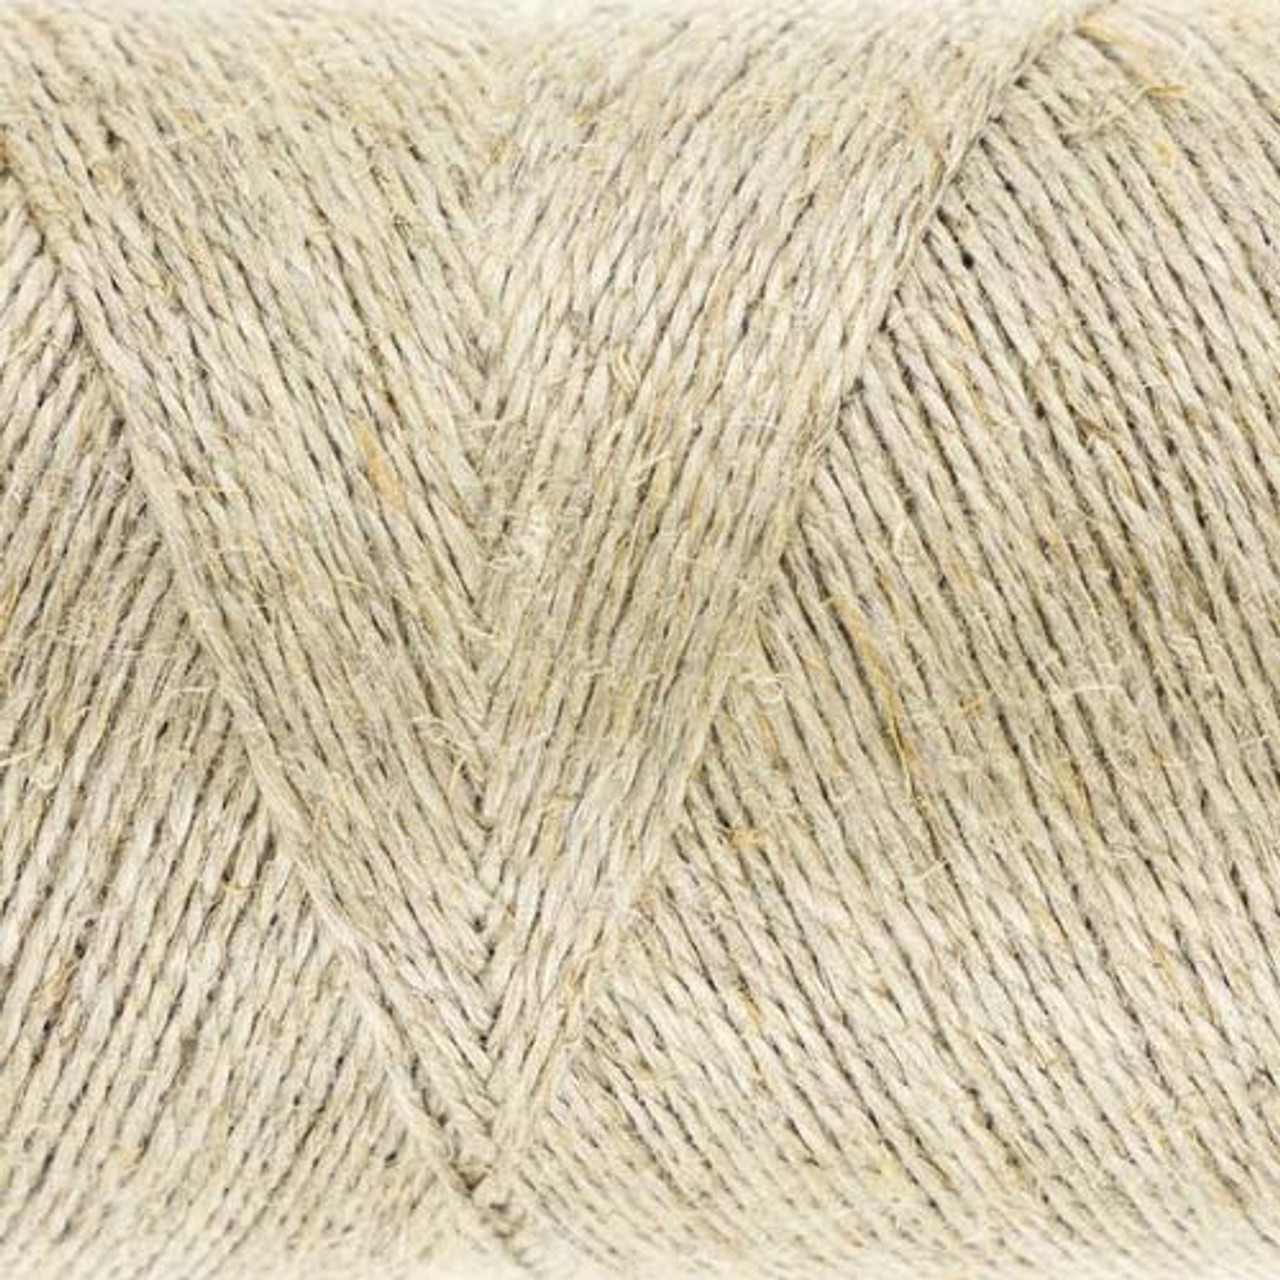 Hemp & Cotton Worsted - 8 oz cone - Natural